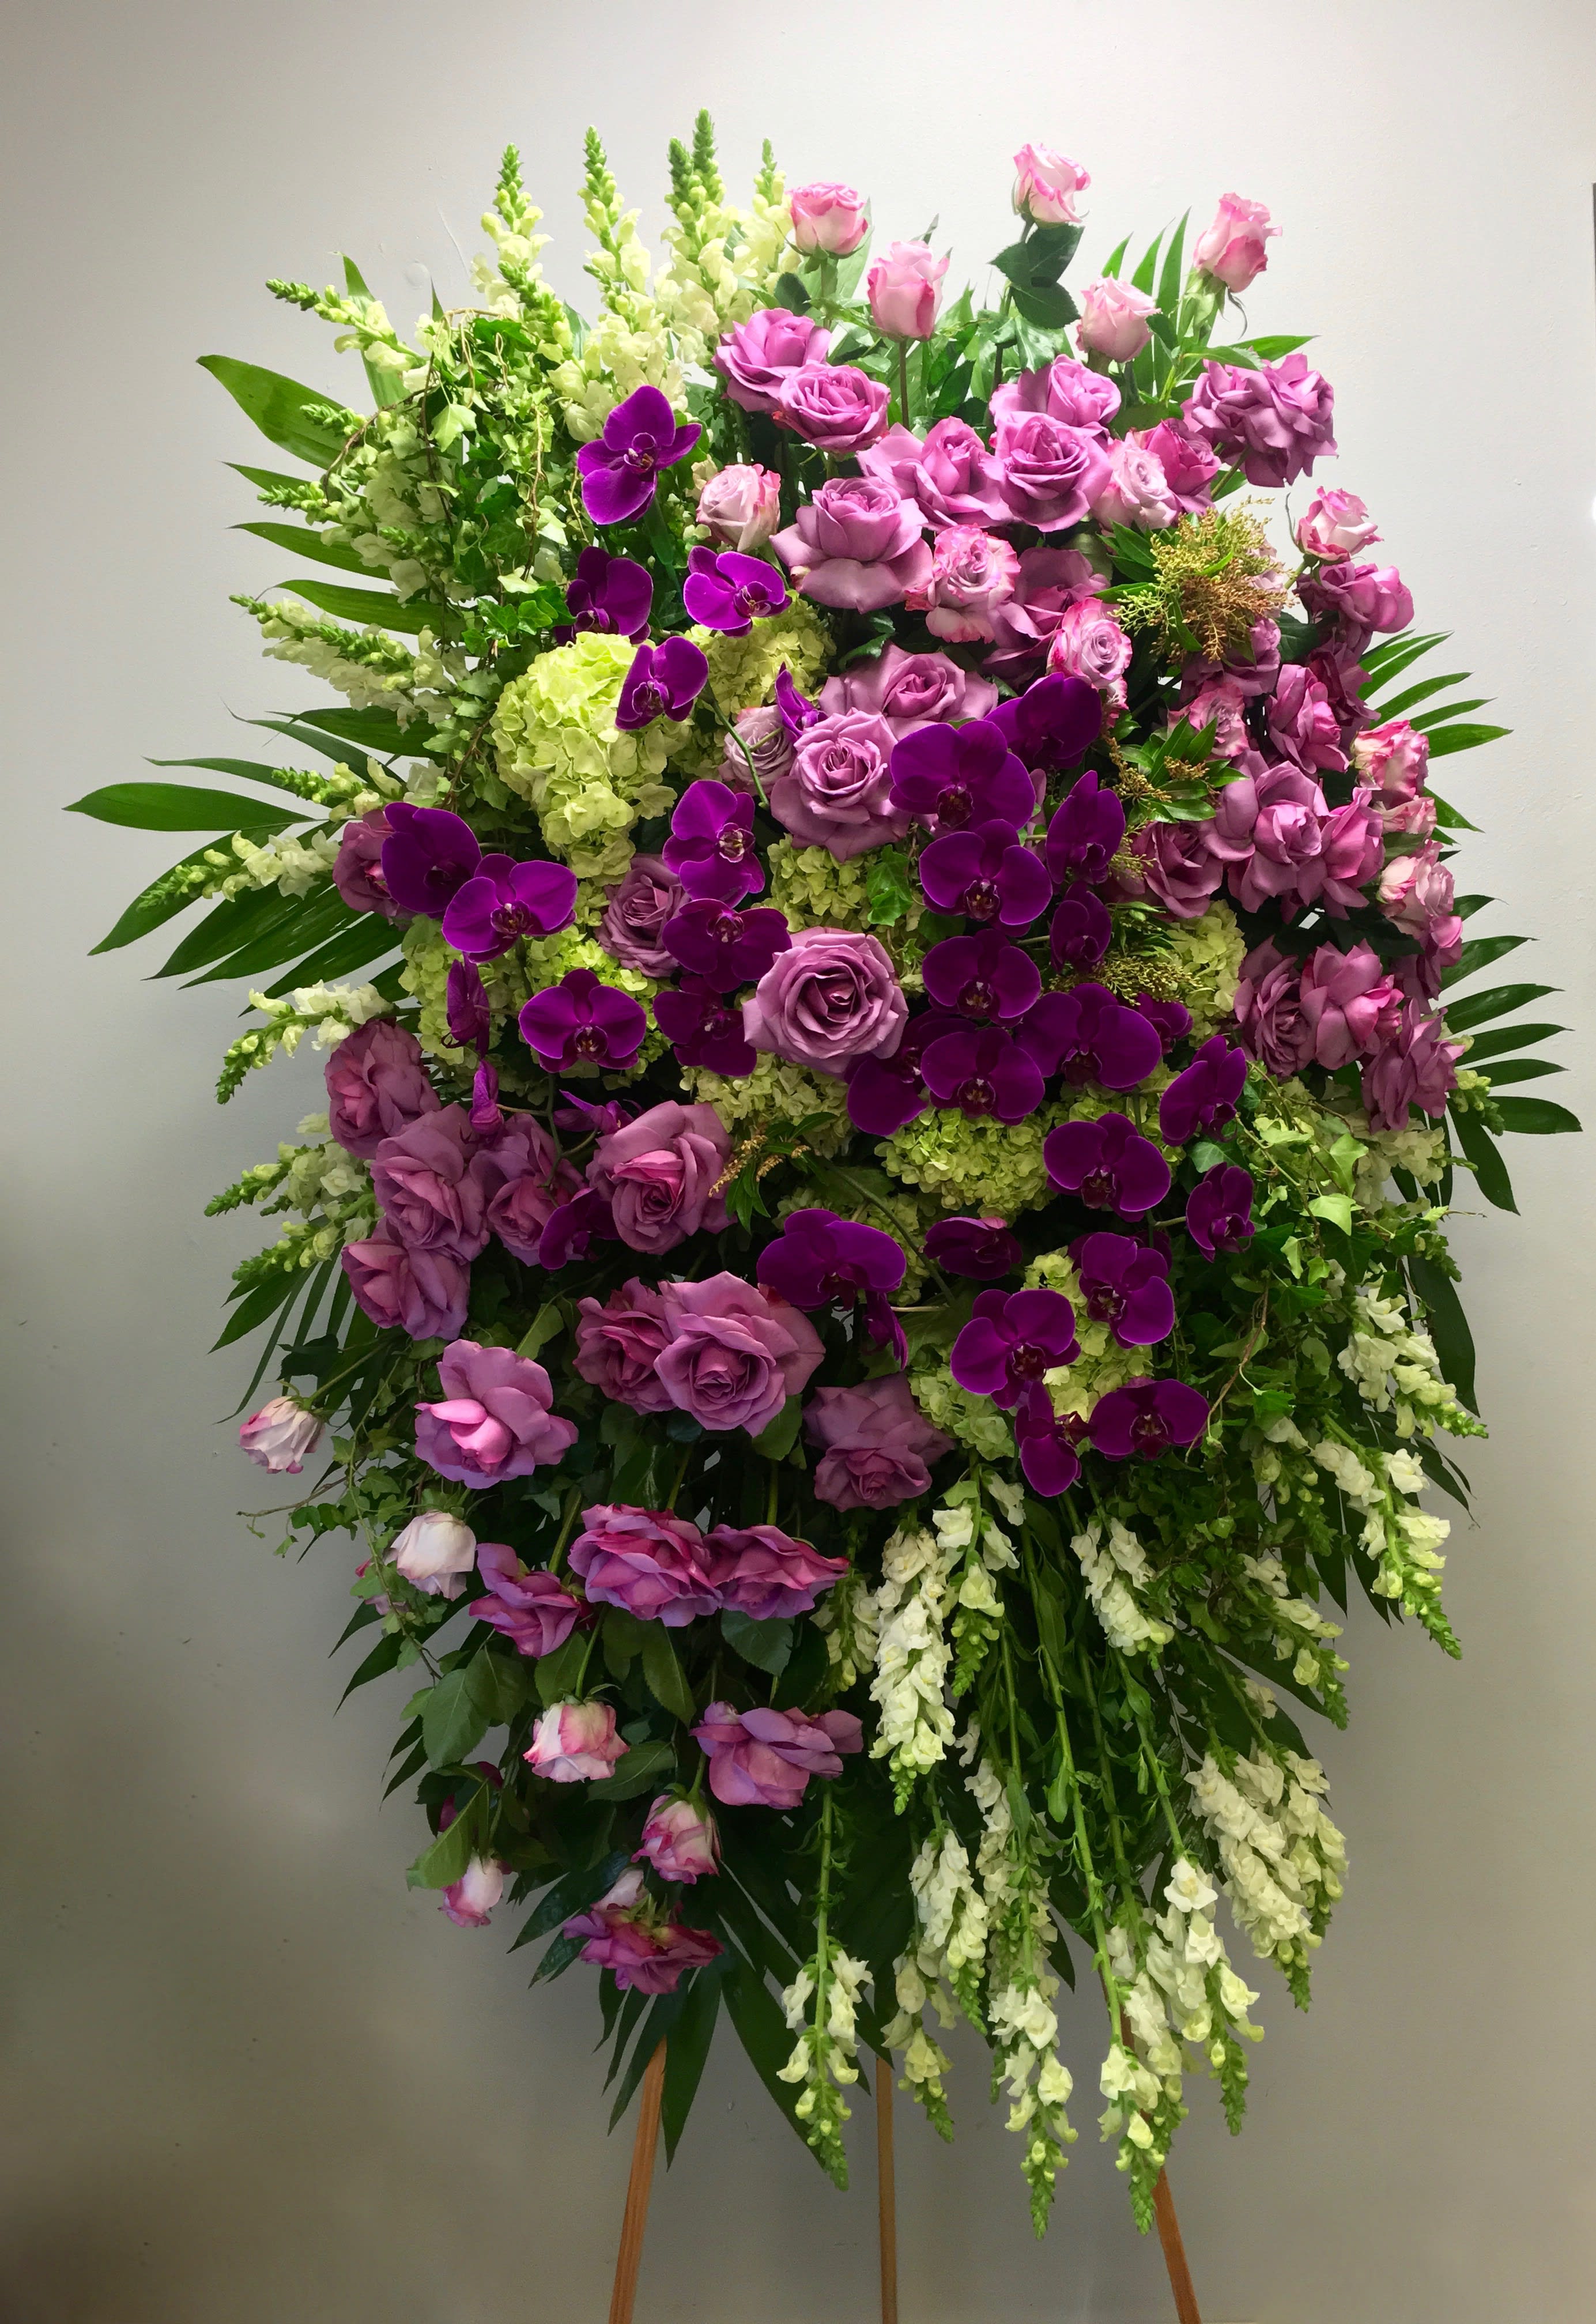 Purple Orchid Spray  - This sympathy spray contains roses, orchids, hydrangeas, and seasonal greens.    We include easel, printed banner and delivery (some fees may apply).  Standard size is 30'' wide, deluxe is 36'', and premium is 42''.